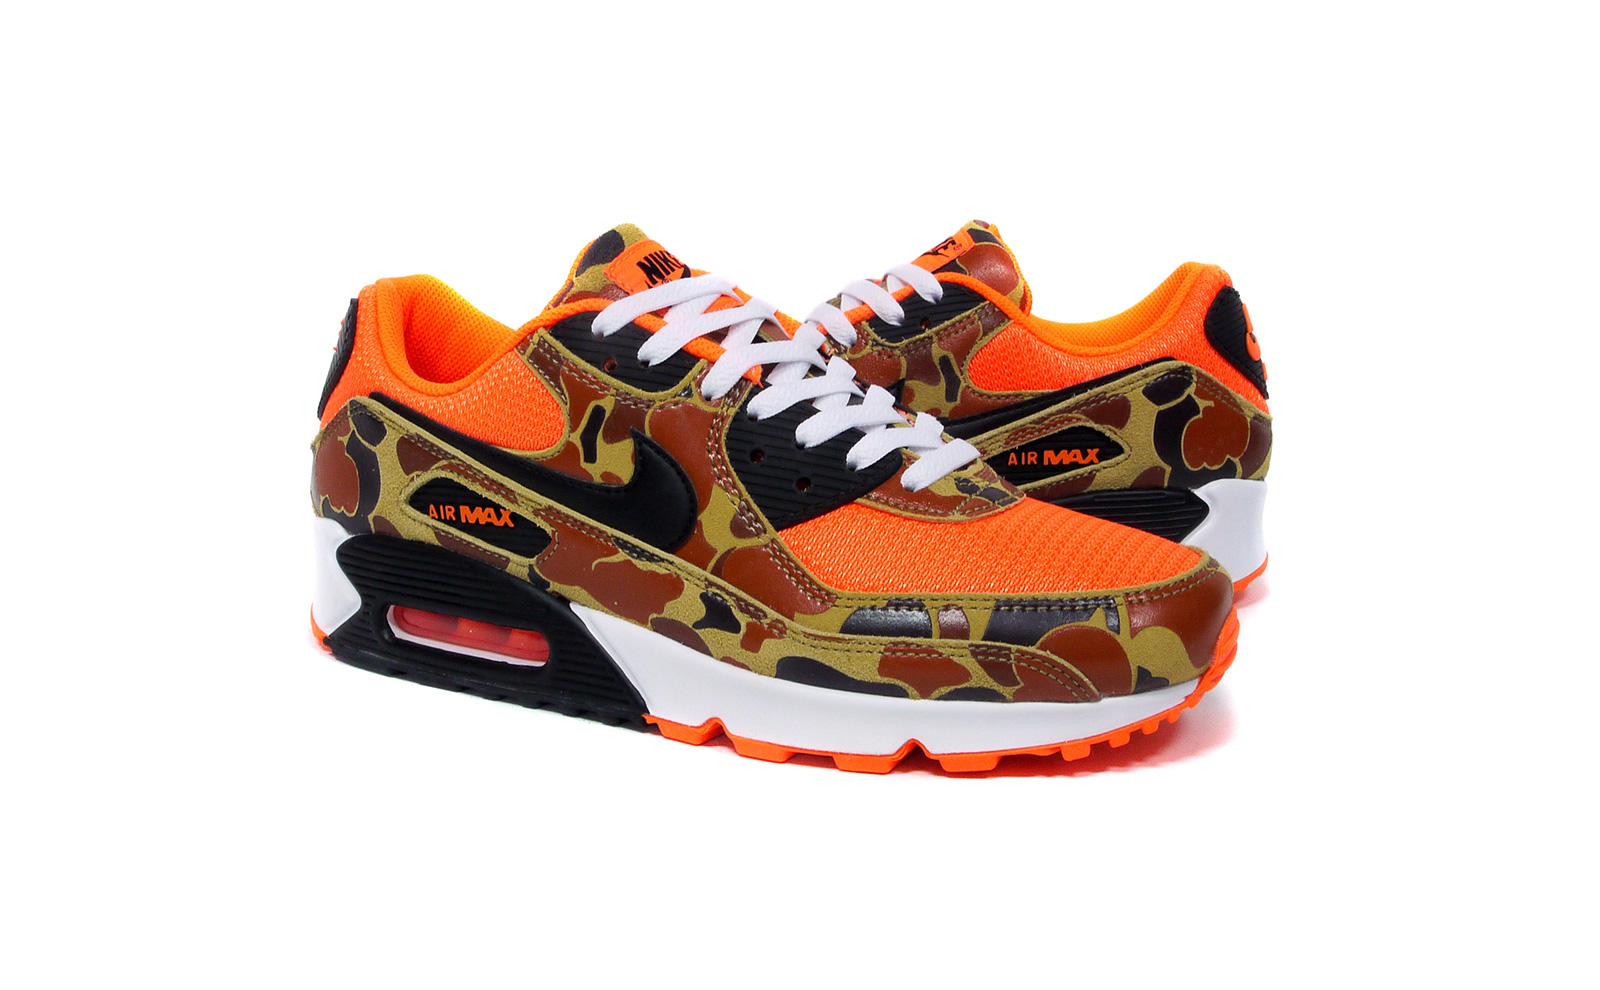 NIKE AIR MAX 90 SP “DUCK CAMO” “30th ANNIVERSARY” | 特集ページ Features